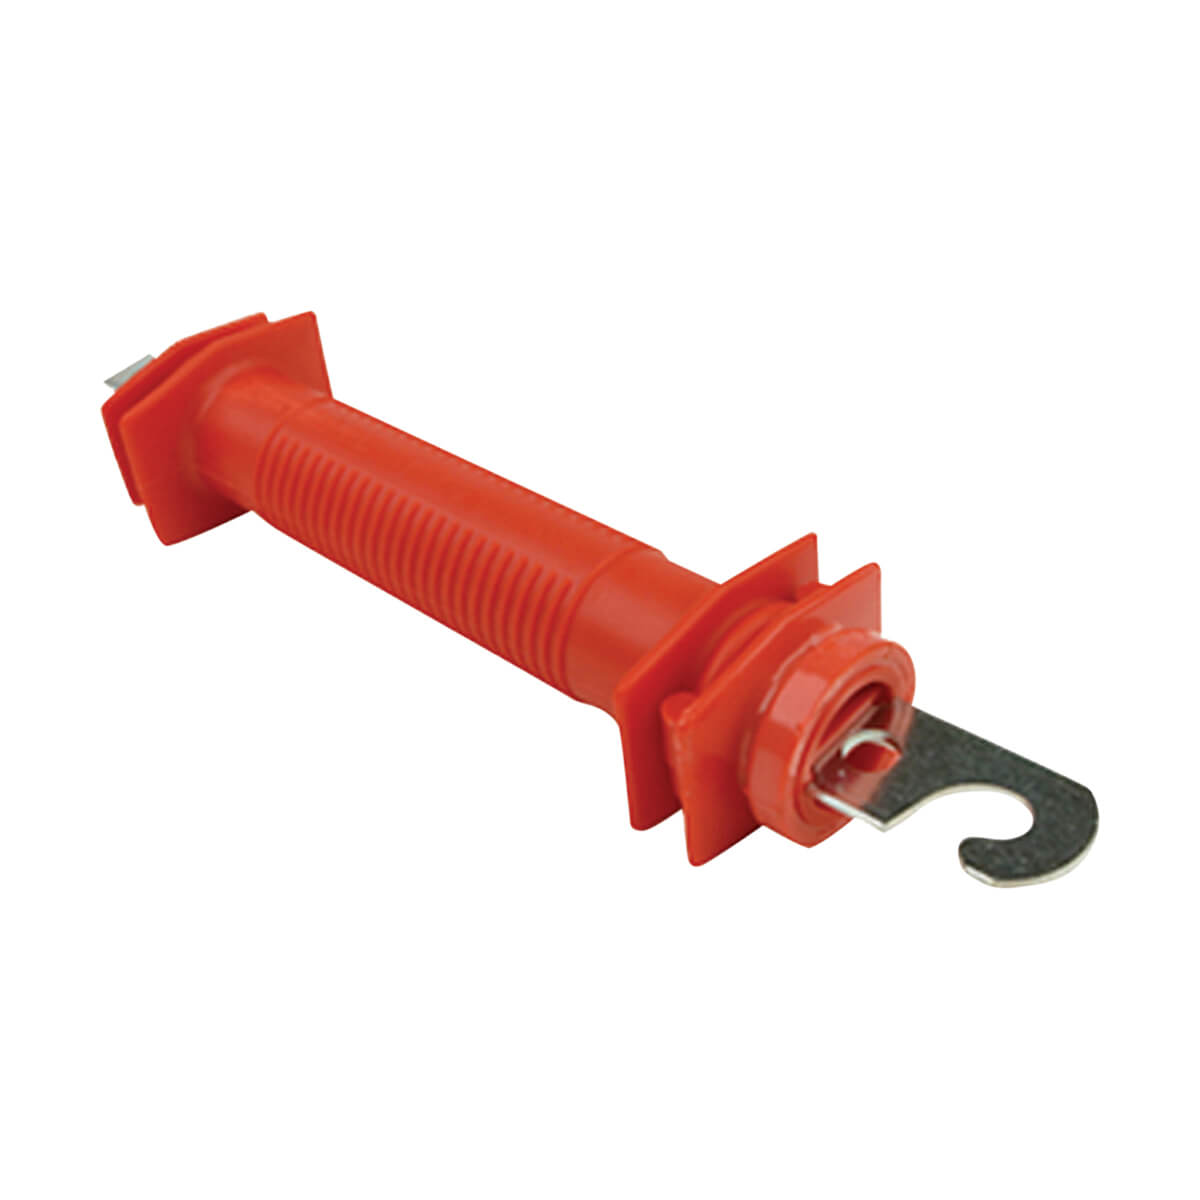 Power Wizard Plastic Gate Handles - Red - H-2